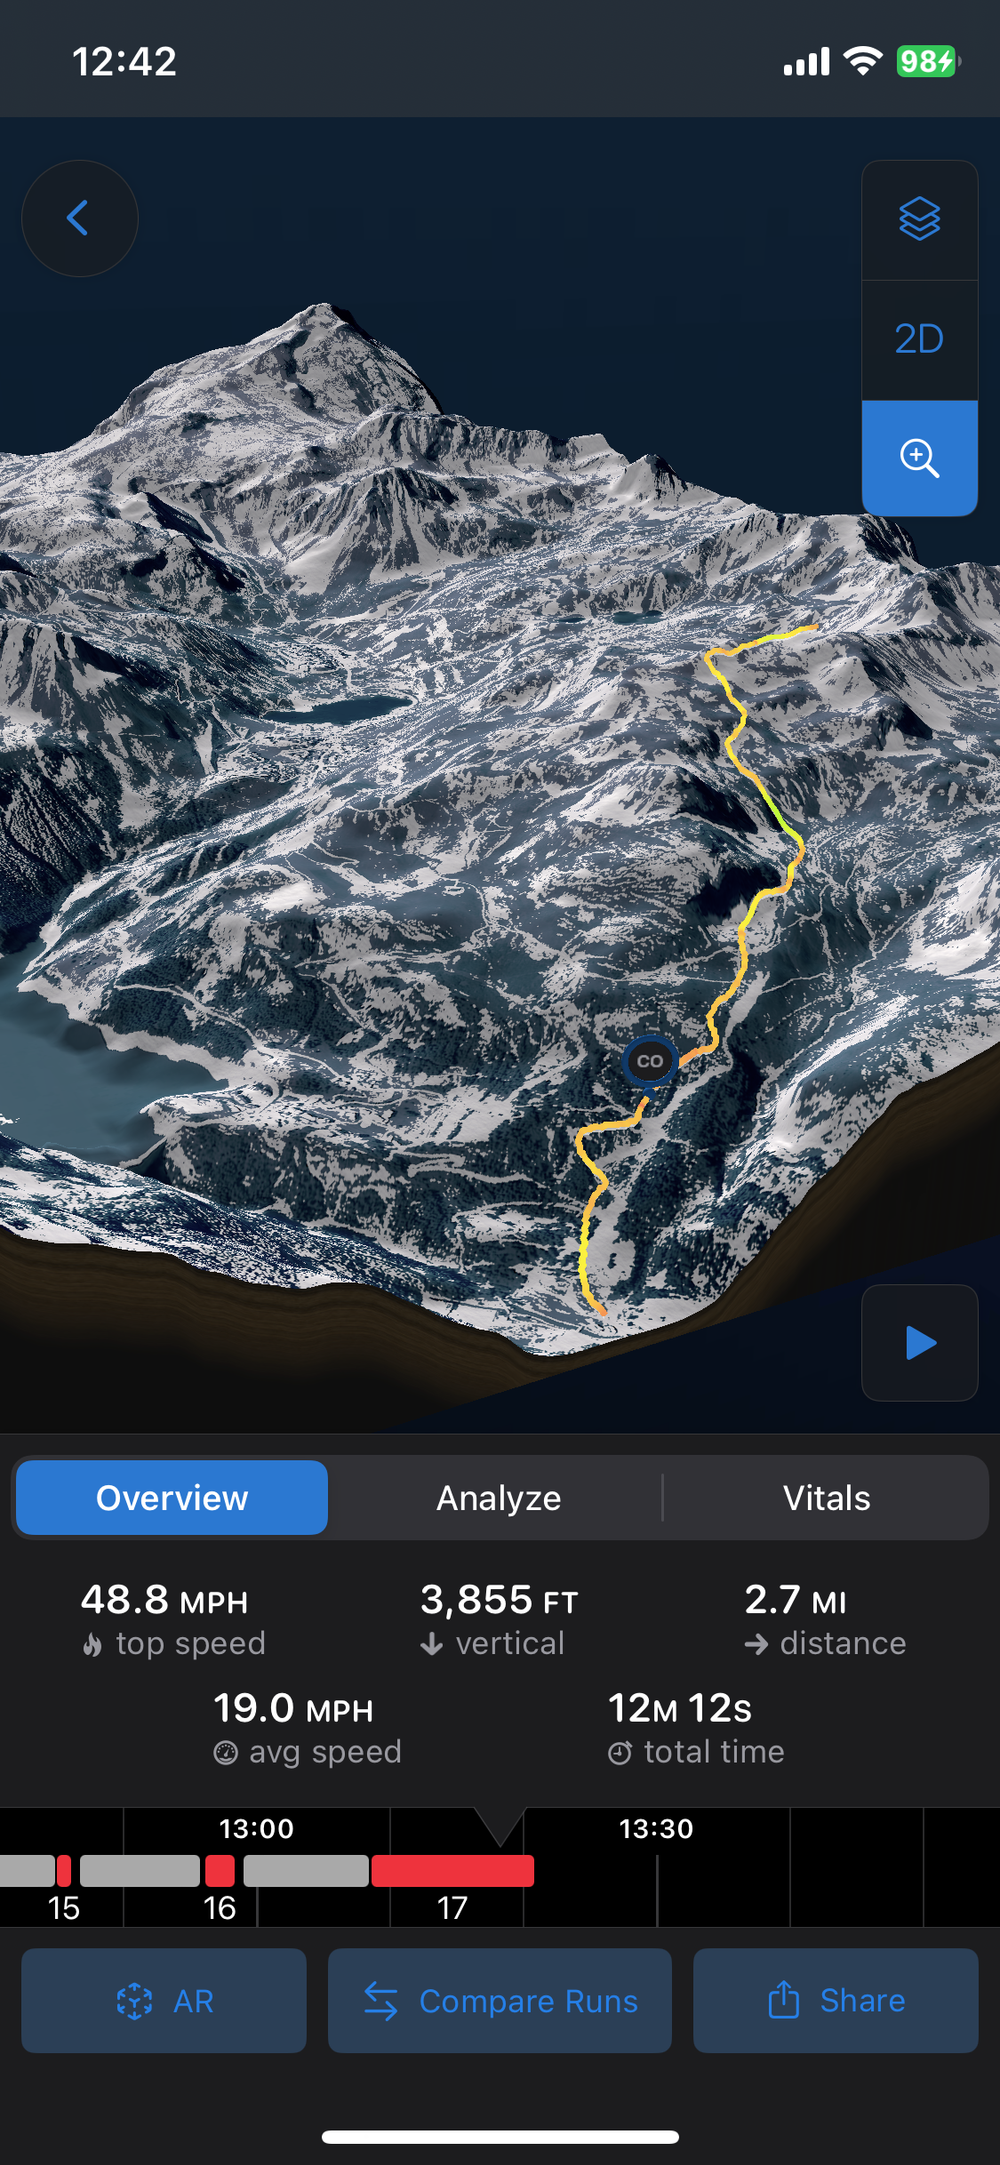  A 3d map view is available for Slopes Premium subscribers. 